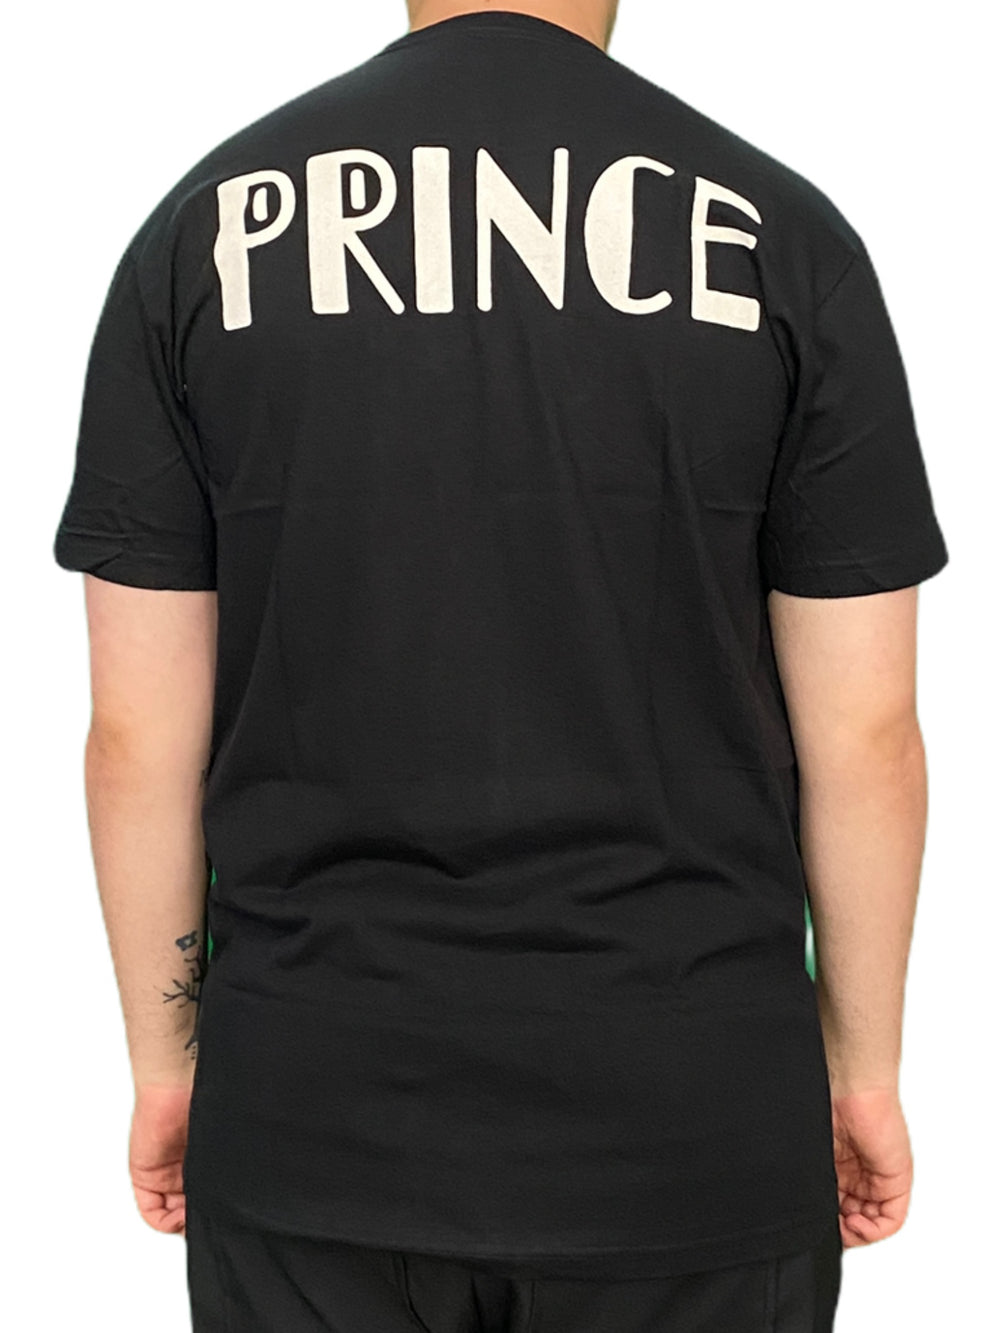 Prince – Official Controversy Jumbo Print Unisex T Shirt Back Print LARGE